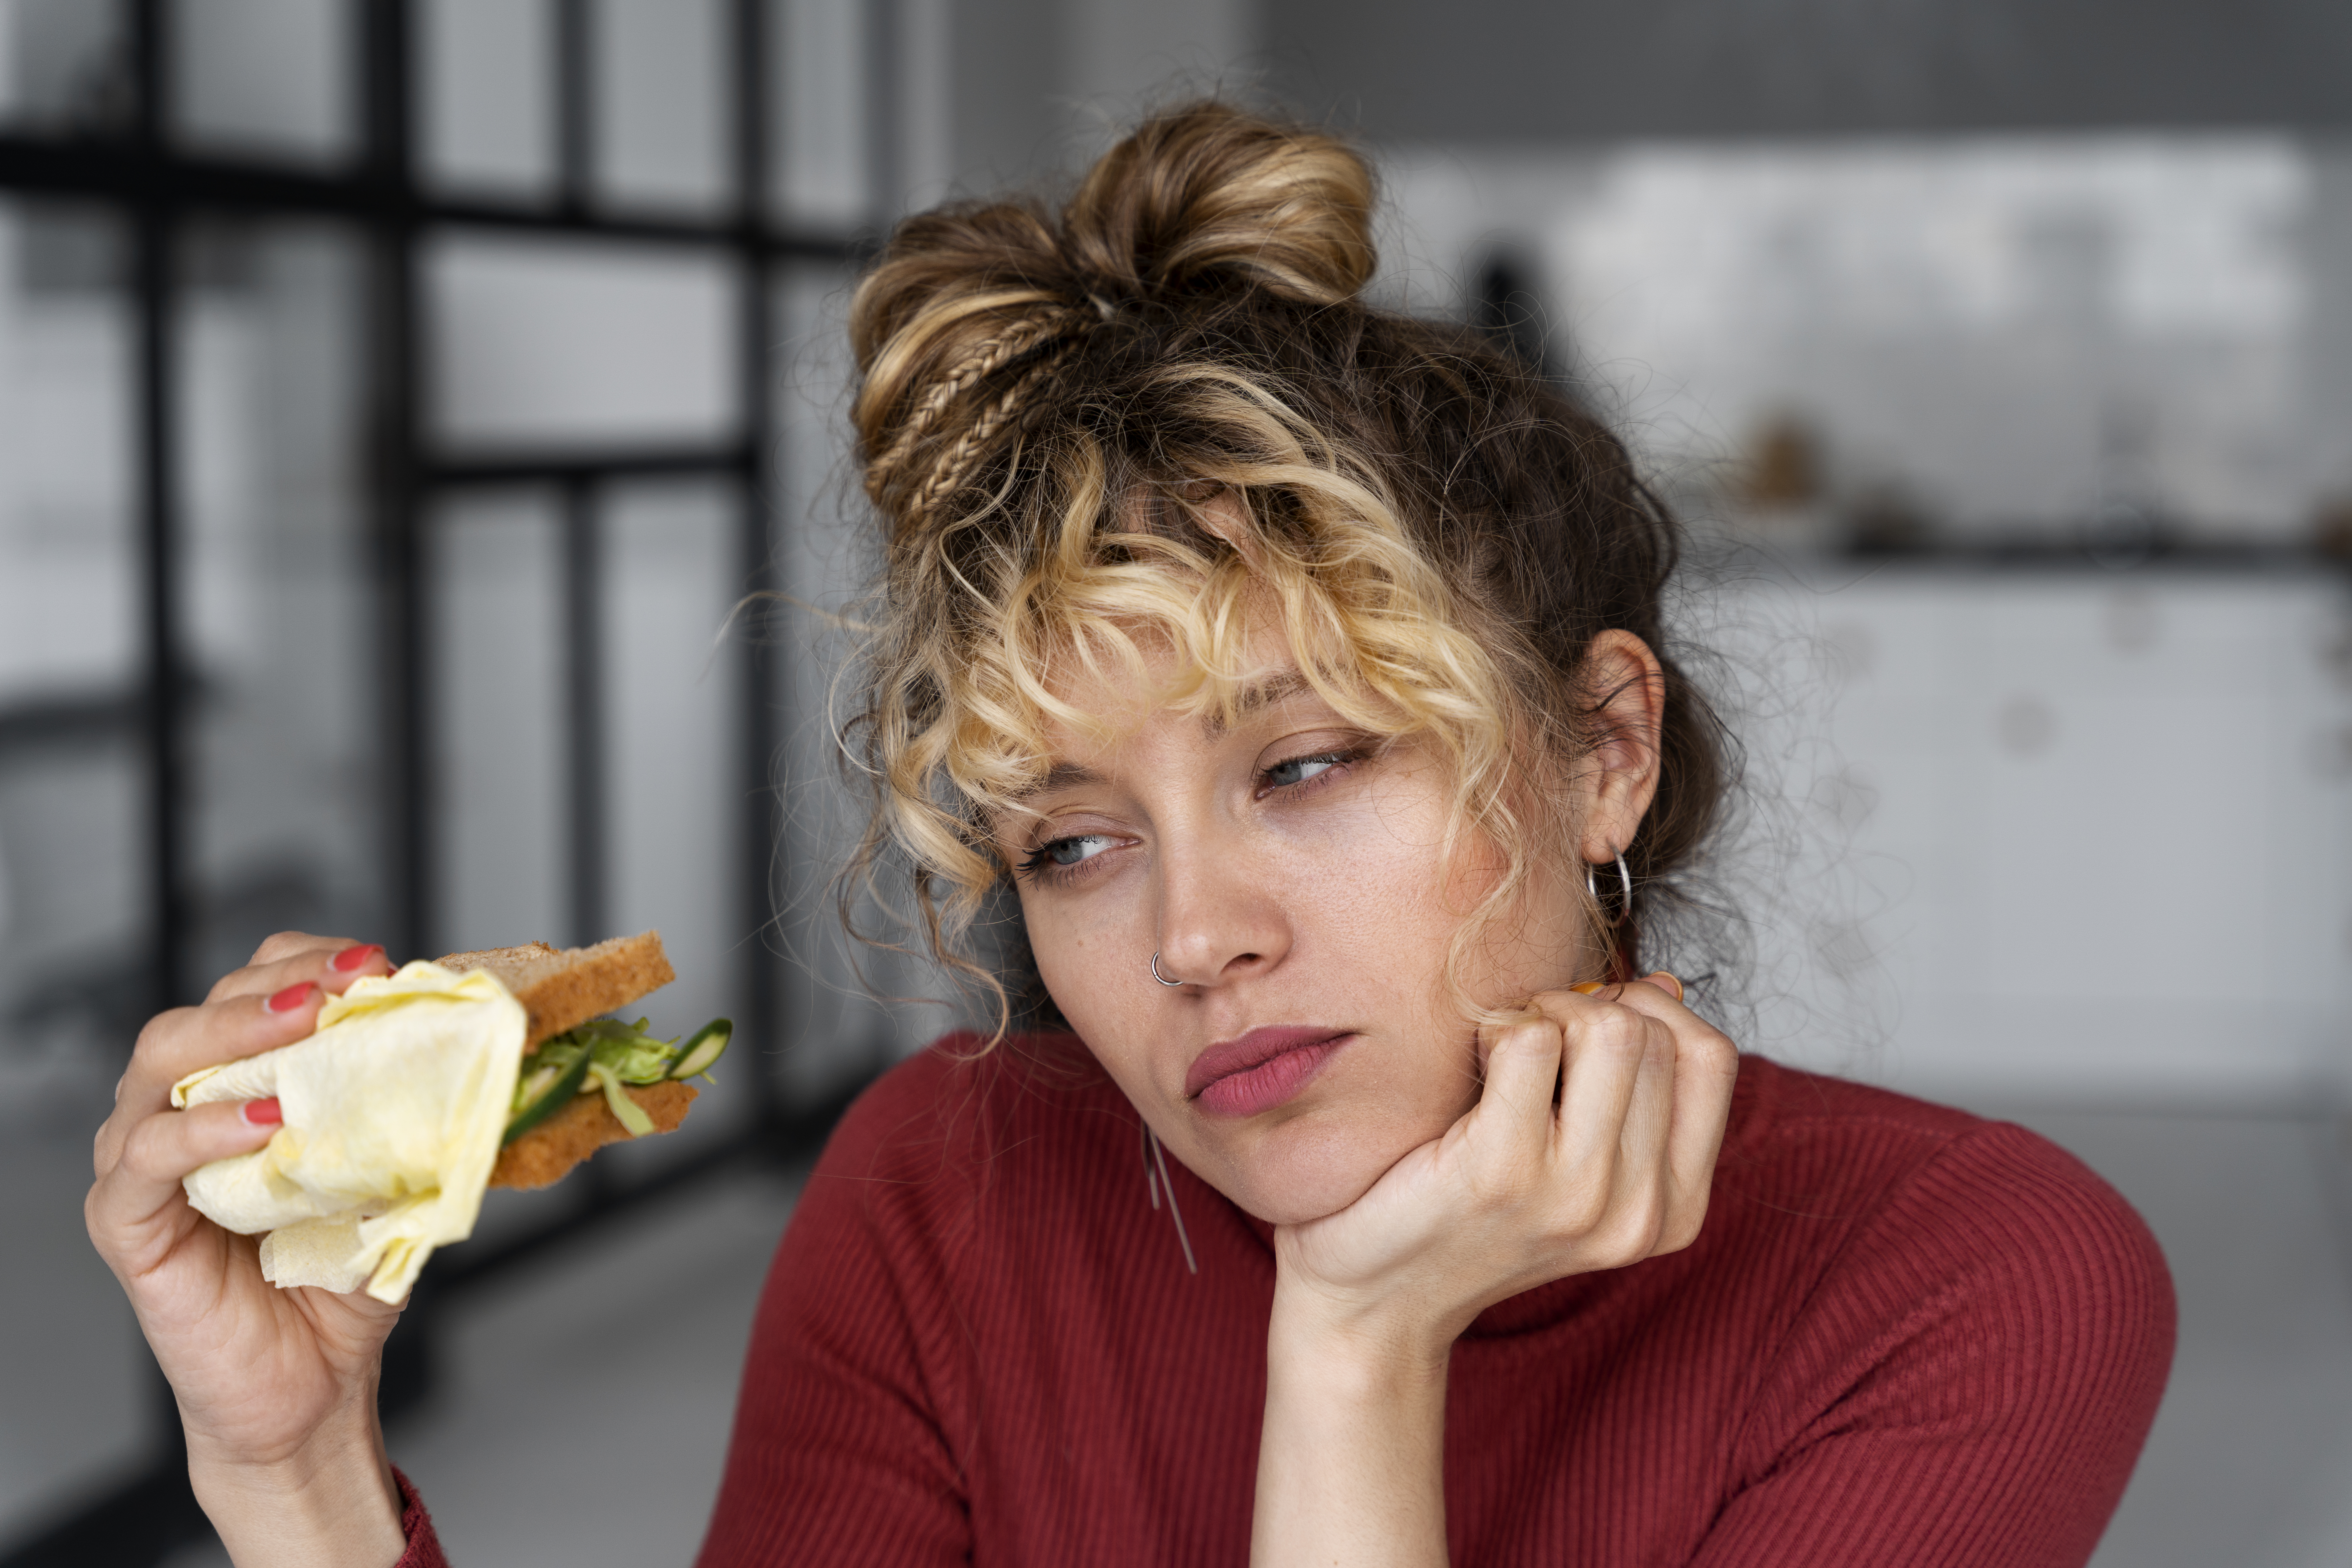 Why snacking might occur during perimenopause or post-menopause